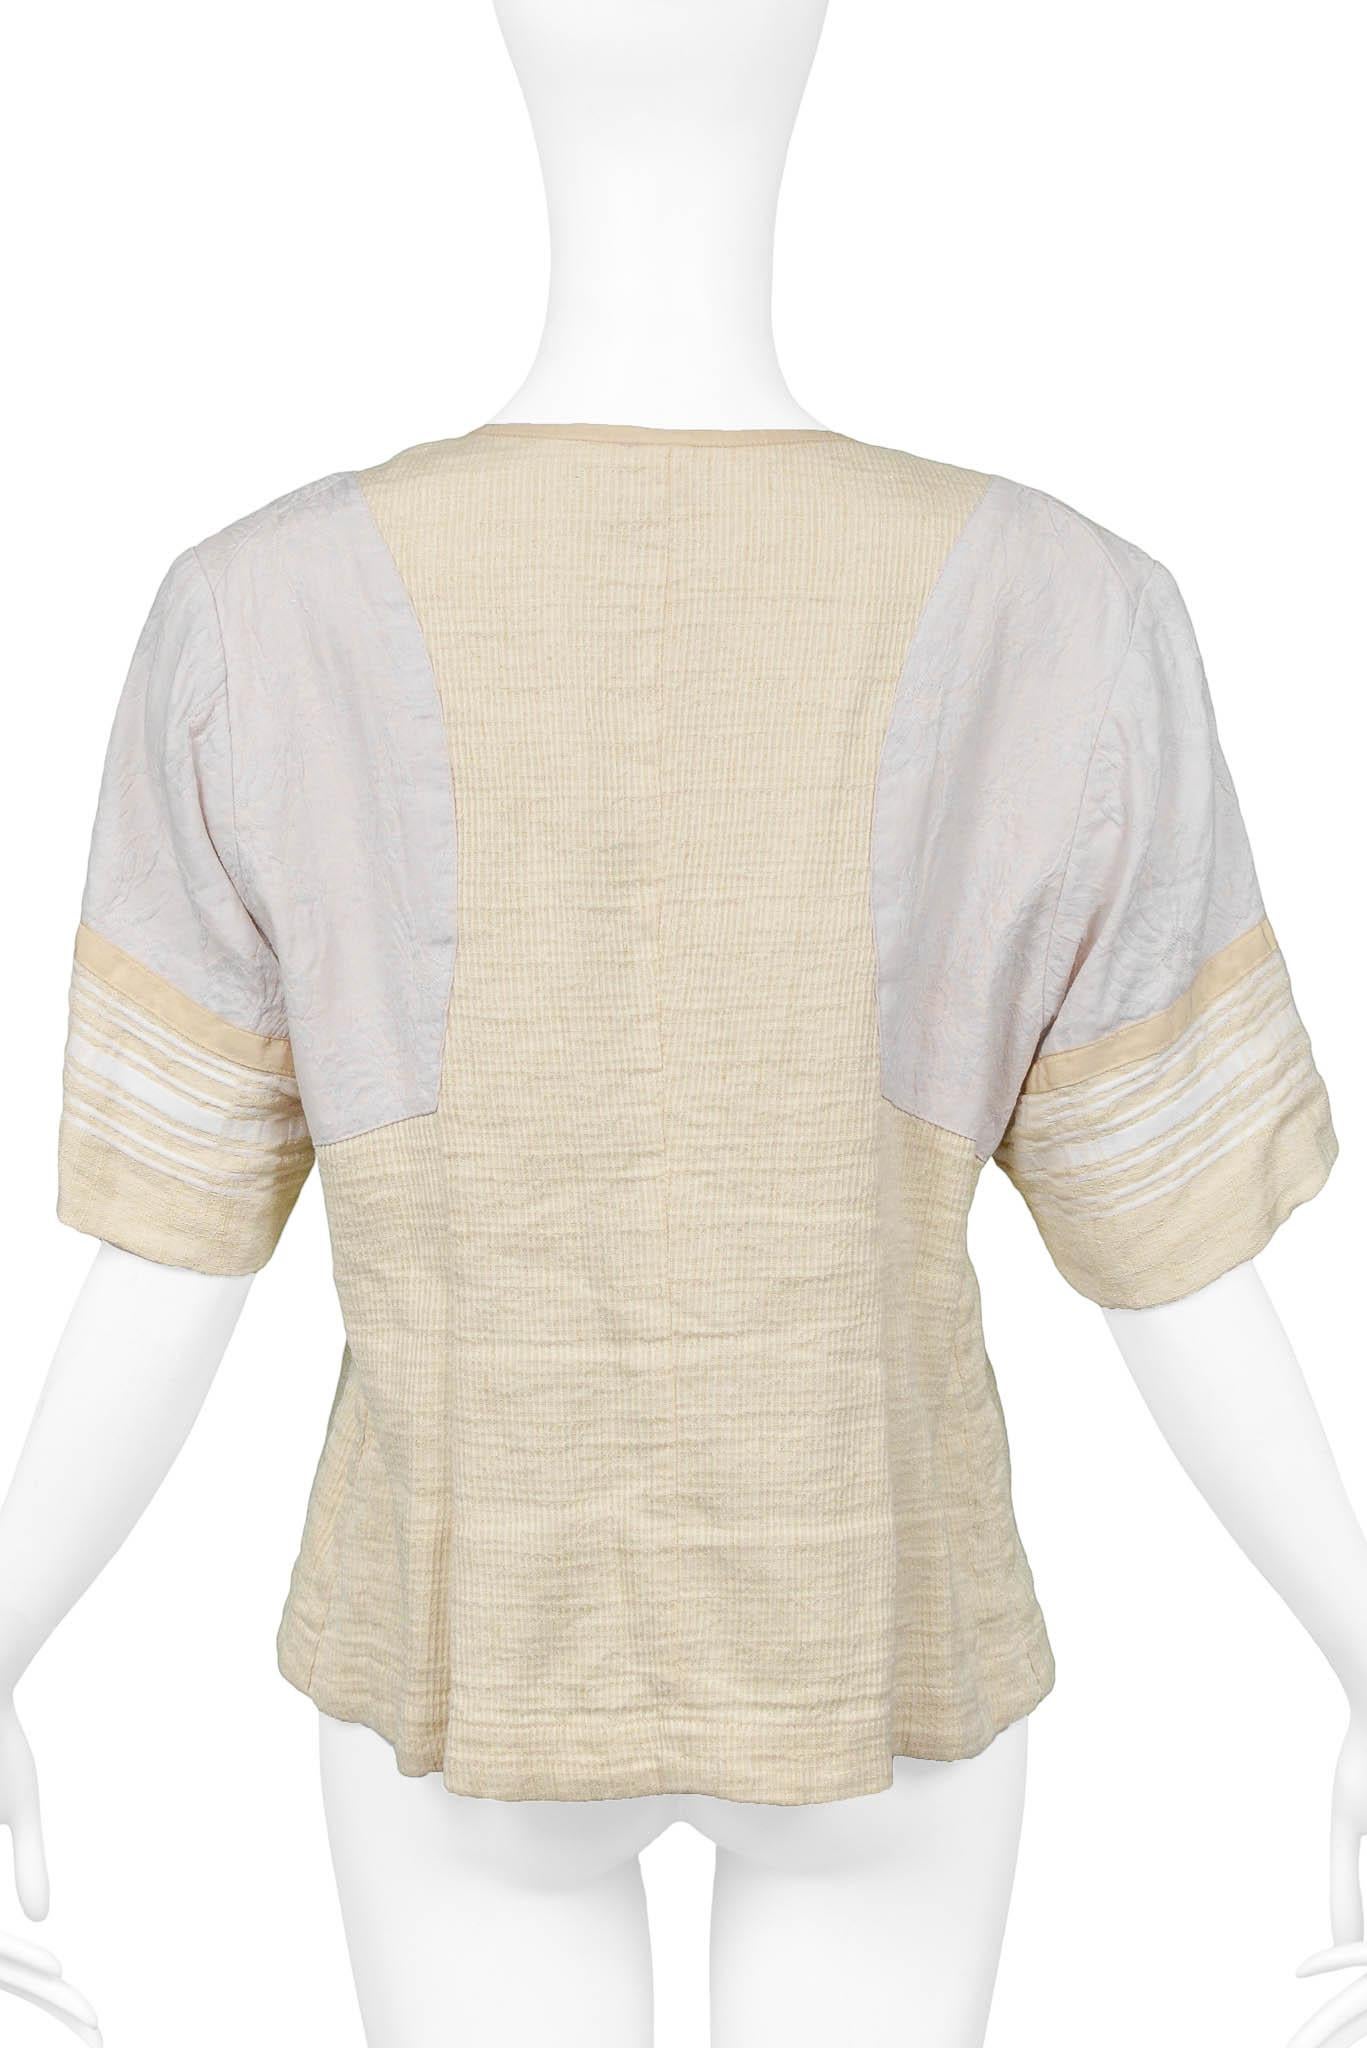 Dries Van Noten Ivory Button Front Short Sleeve Top In Excellent Condition For Sale In Los Angeles, CA